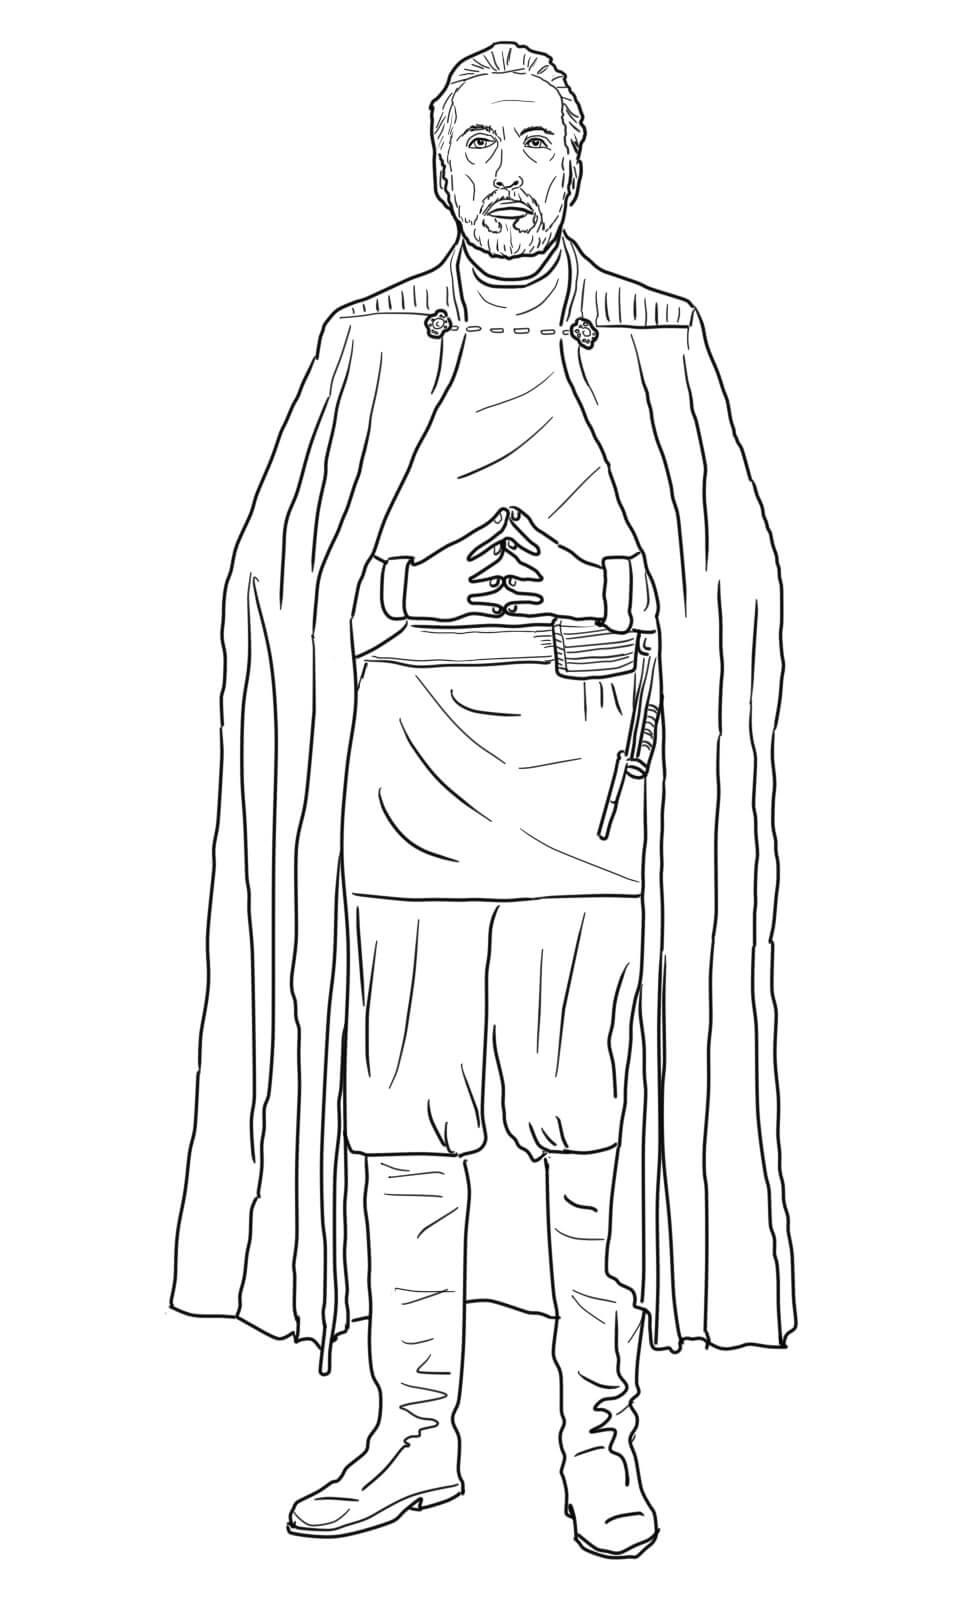 Count Dooku Star Wars Episode II Attack Of The Clones Coloring Page